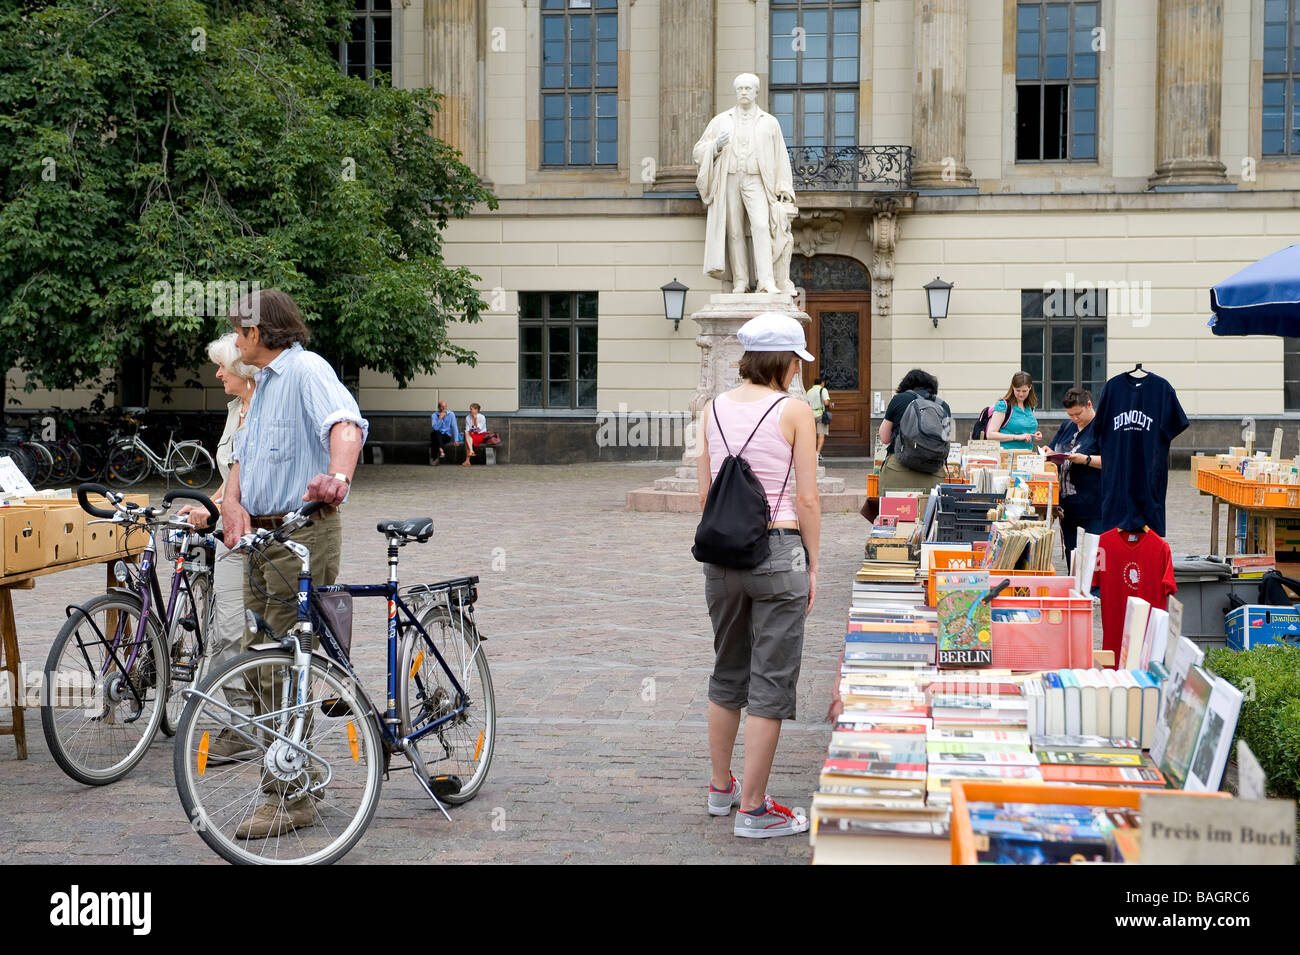 Germany, Berlin, Mitte district, the boulevard Unter den Linden, booksellers at Humboldt University Stock Photo